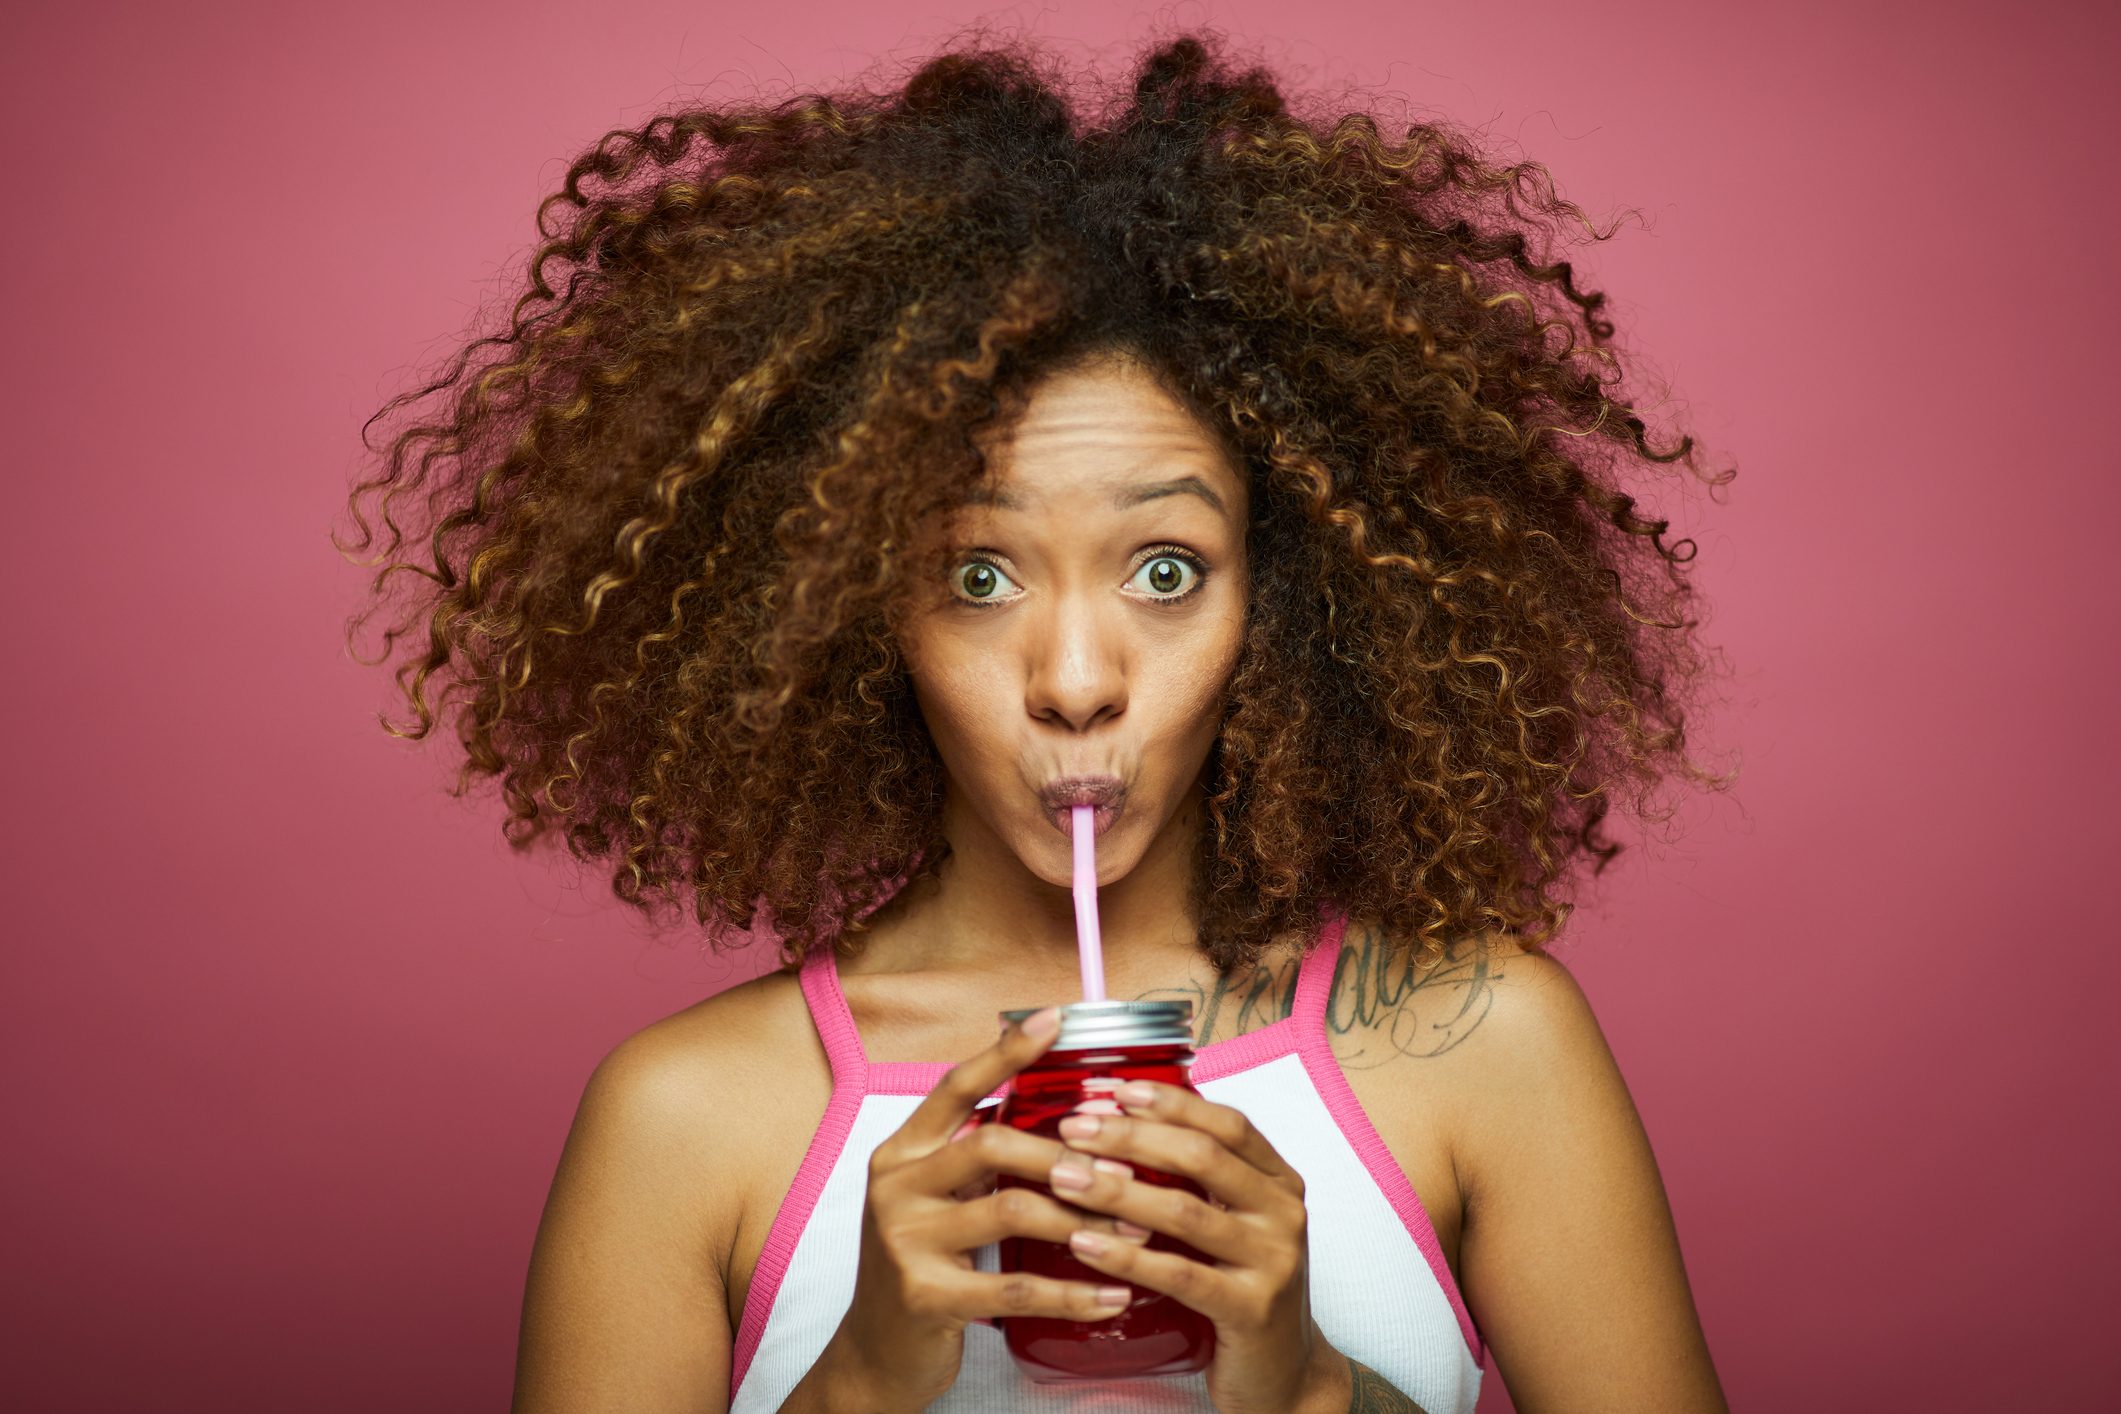 Do Straws Cause Wrinkles? Here's The Truth